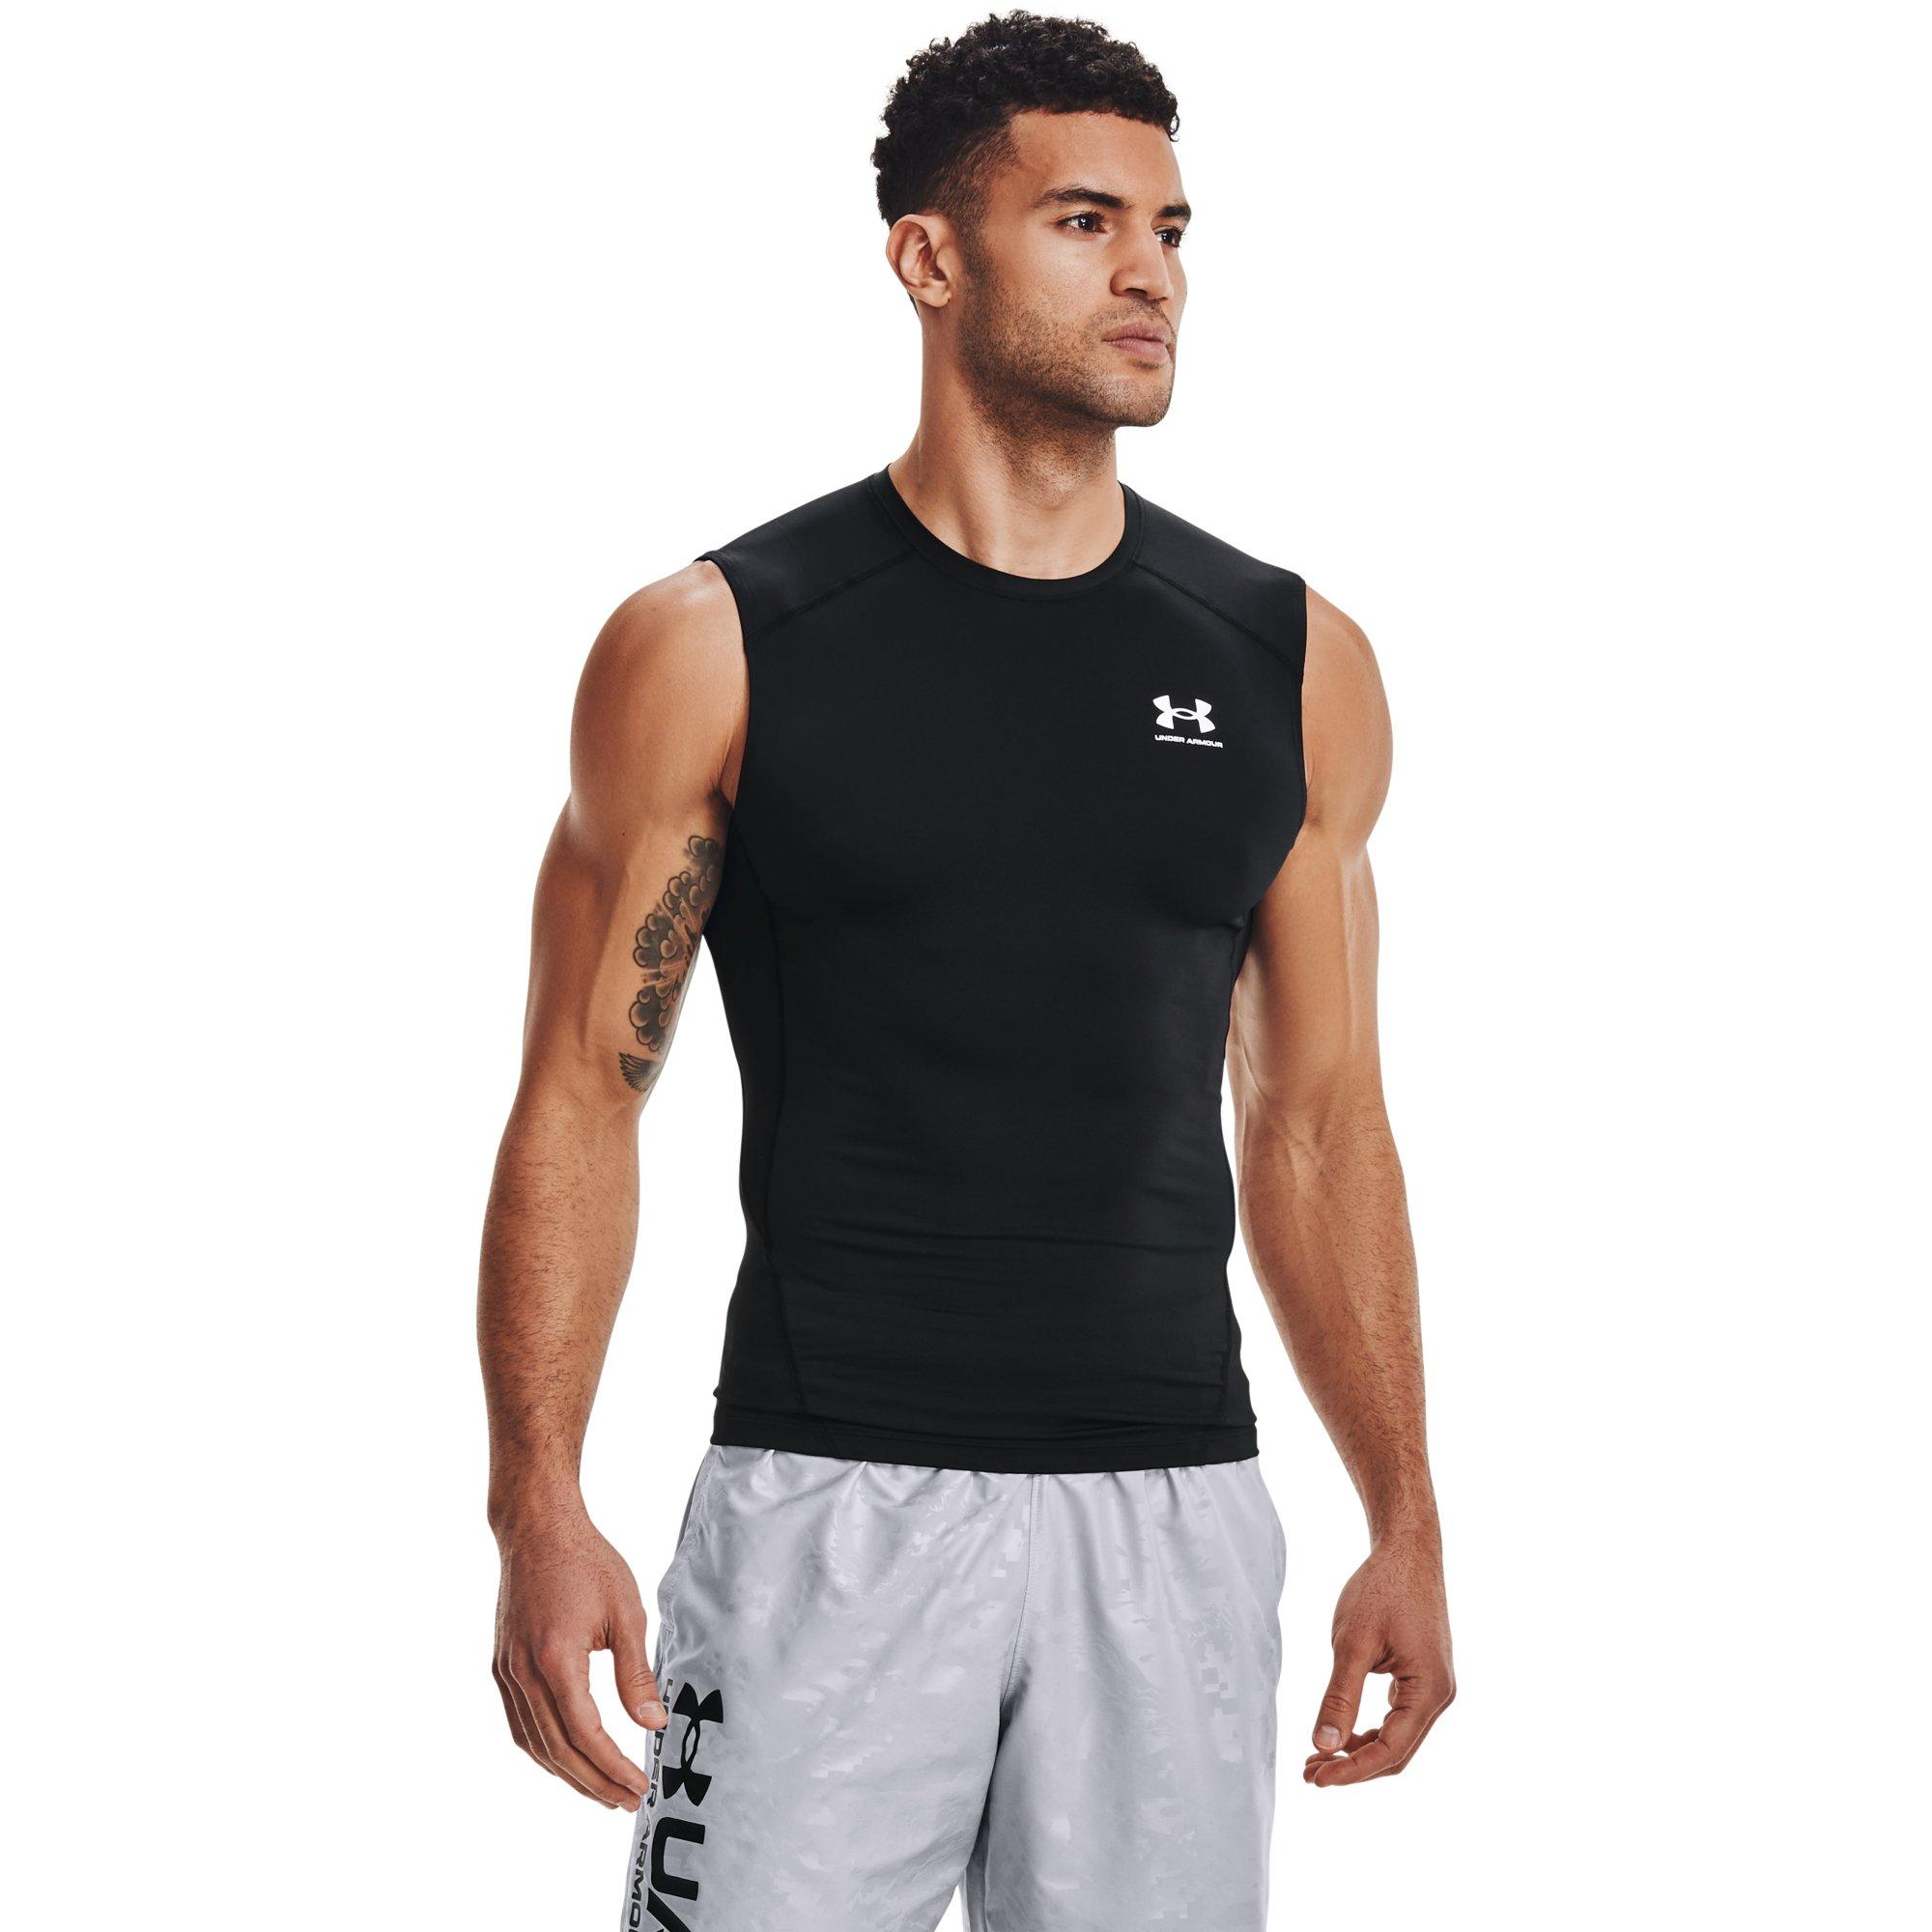 coil look in finger Under Armour Men's HeatGear Sleeveless Compression Shirt